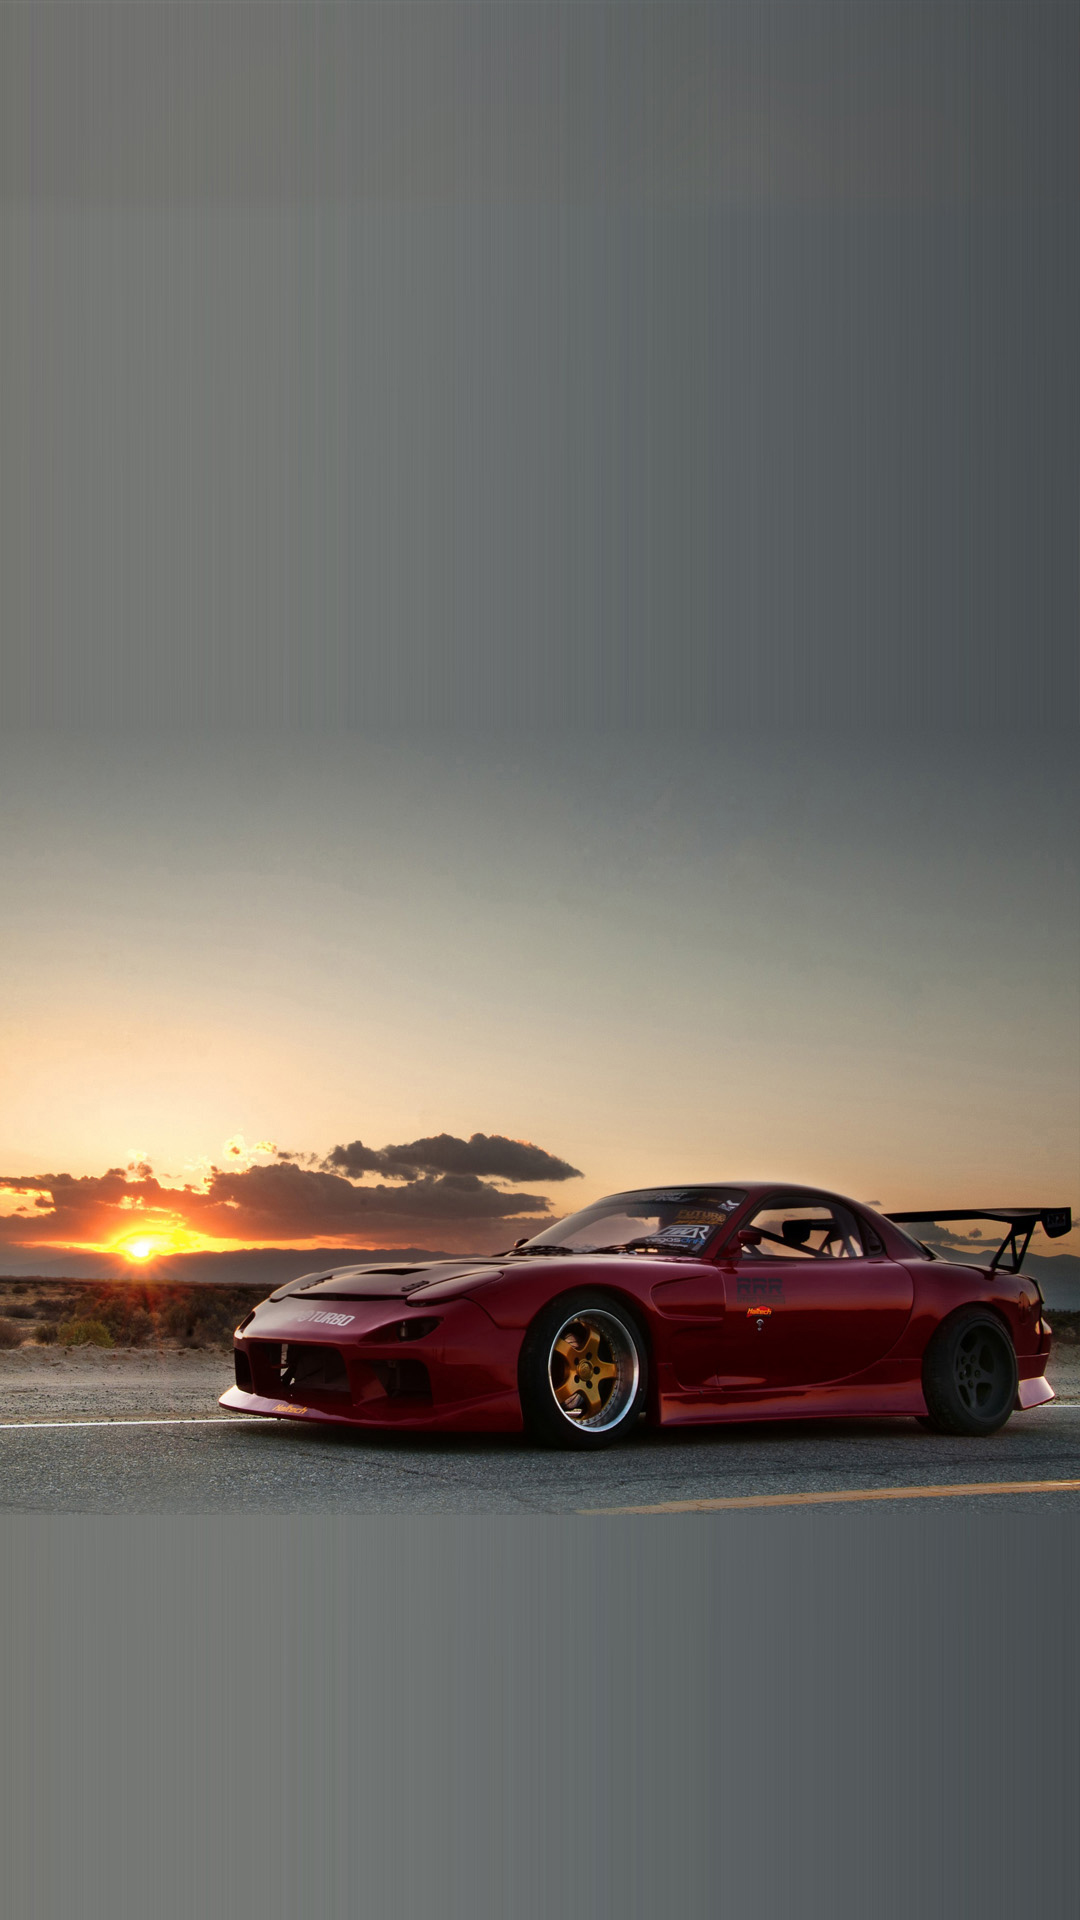 Free Download Phone Mazda Rx7 Wallpaper Full Hd Pictures 1080x19 For Your Desktop Mobile Tablet Explore 72 Rx7 Wallpaper Mazda Rx7 Wallpaper Mad Mike Rx7 Wallpaper Mazda Wallpaper